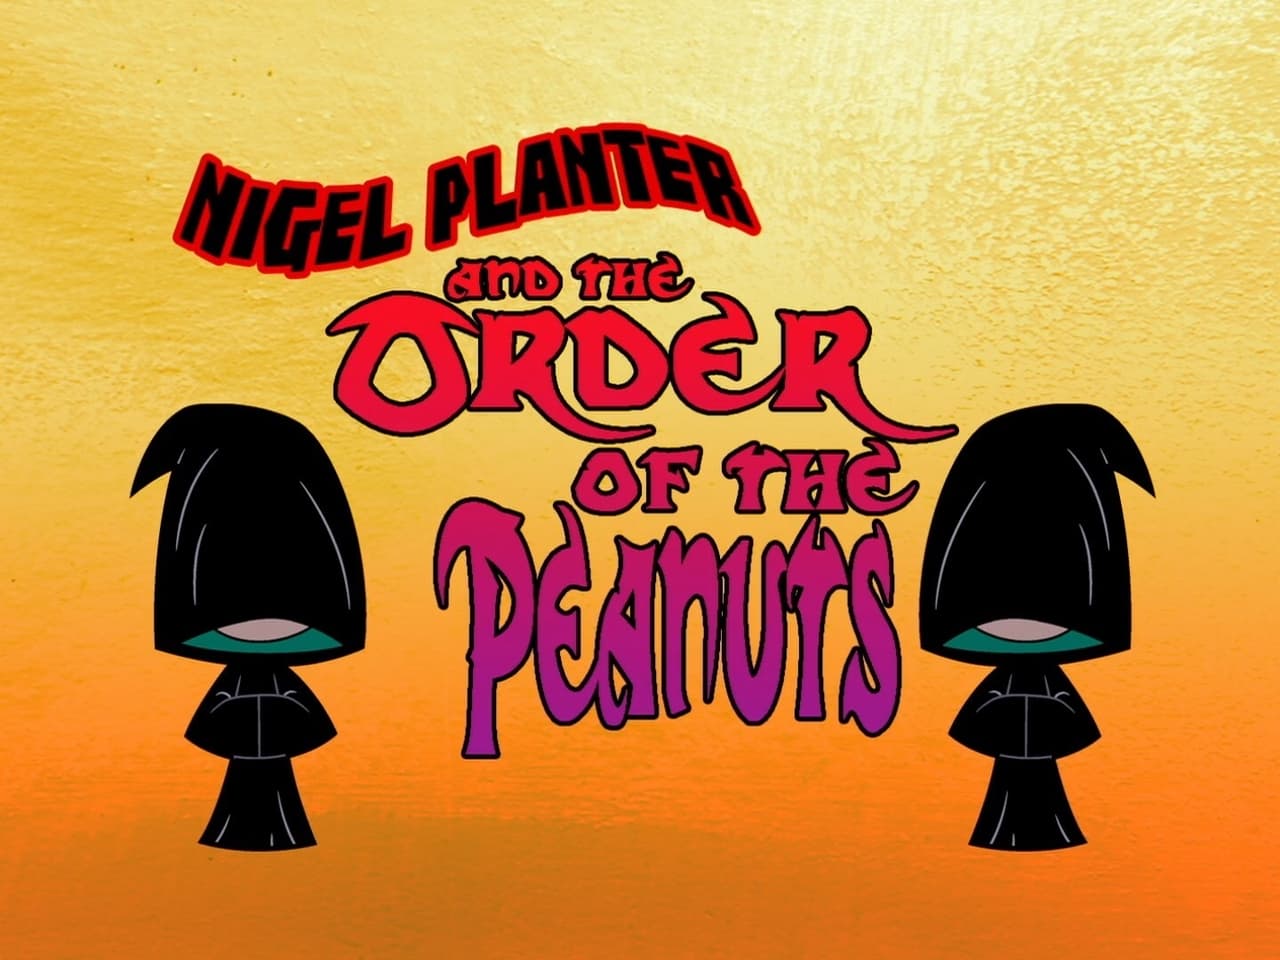 Nigel Planter and the Order of the Peanuts